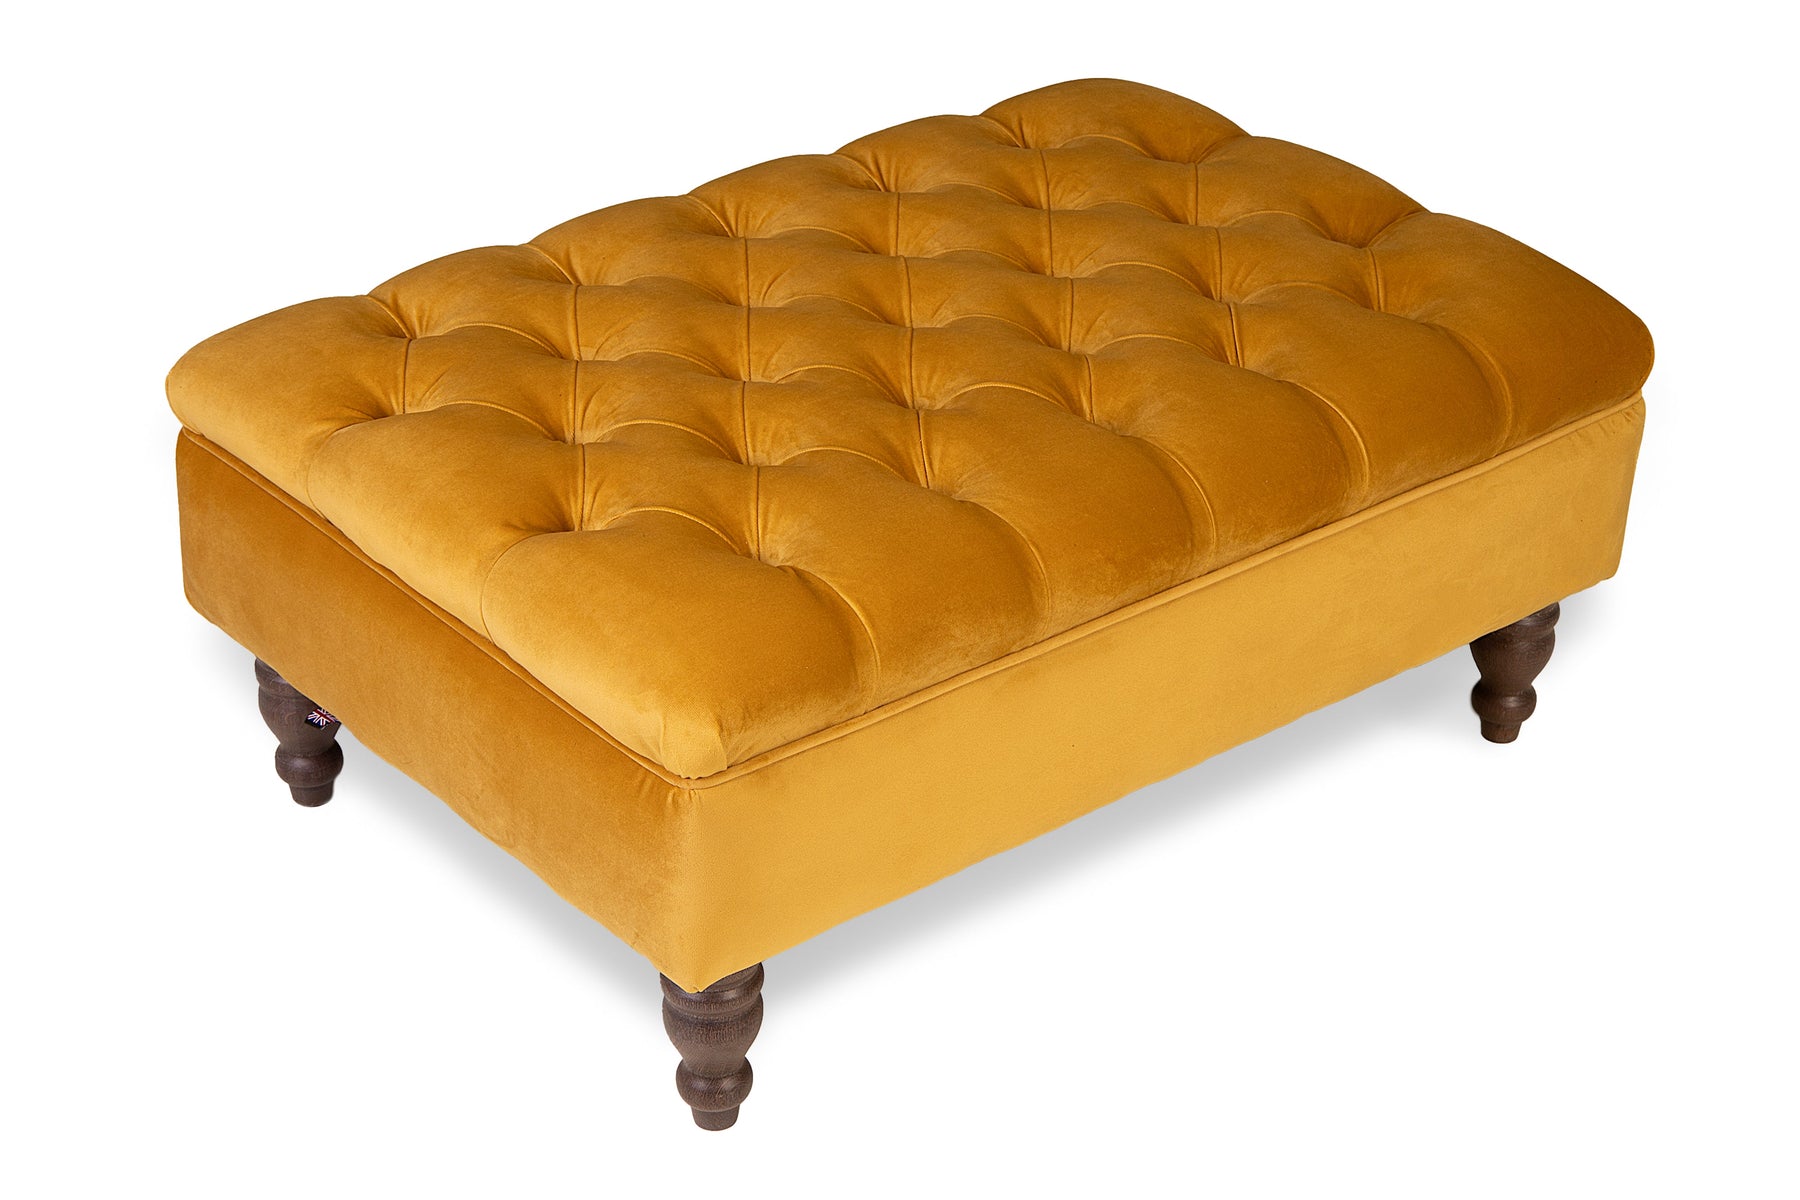 Nola Chesterfield Upholstered Footstool / Coffee Table